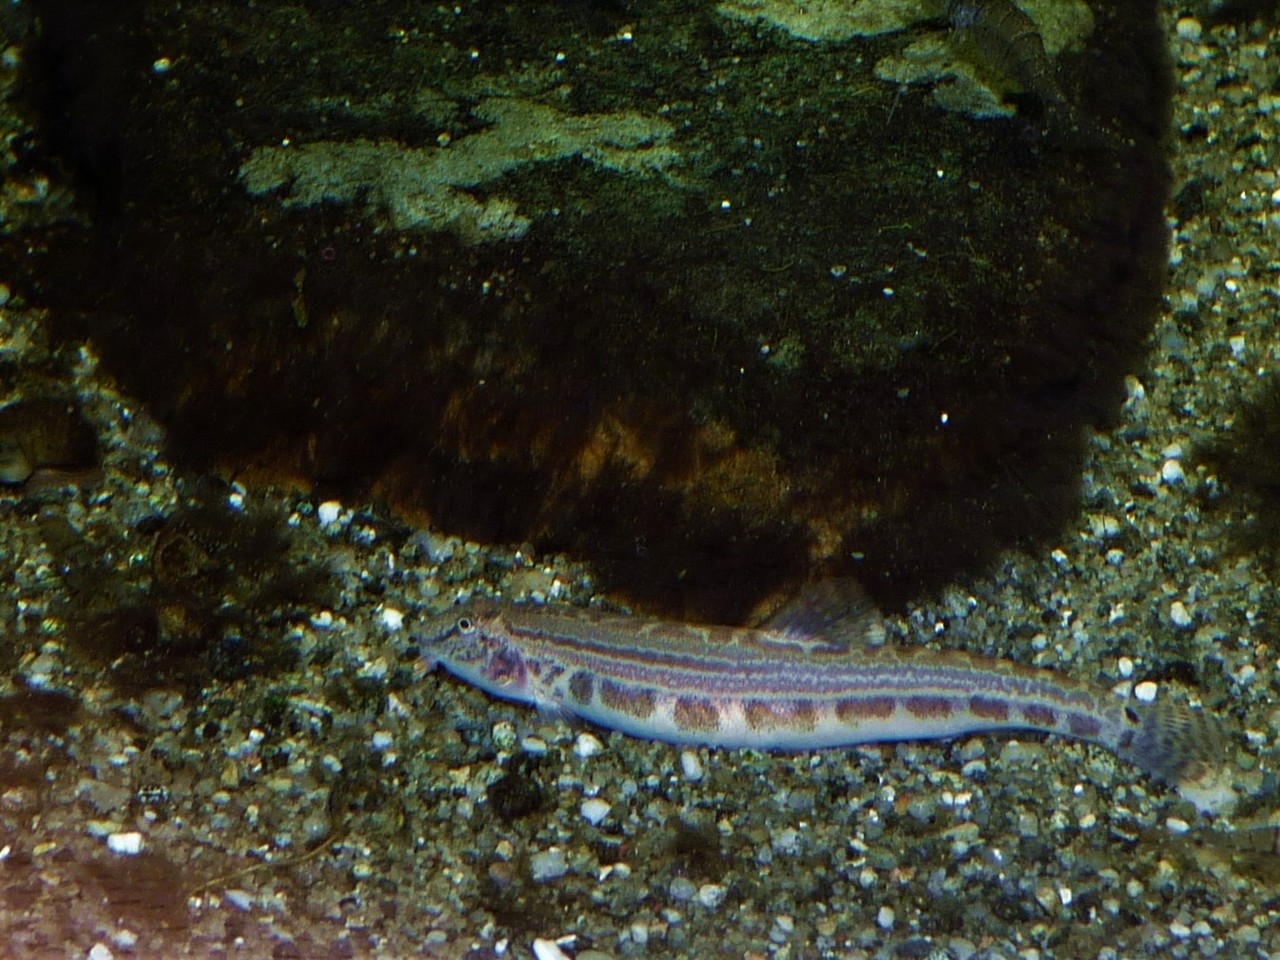 Spined loach Cobitis taenia